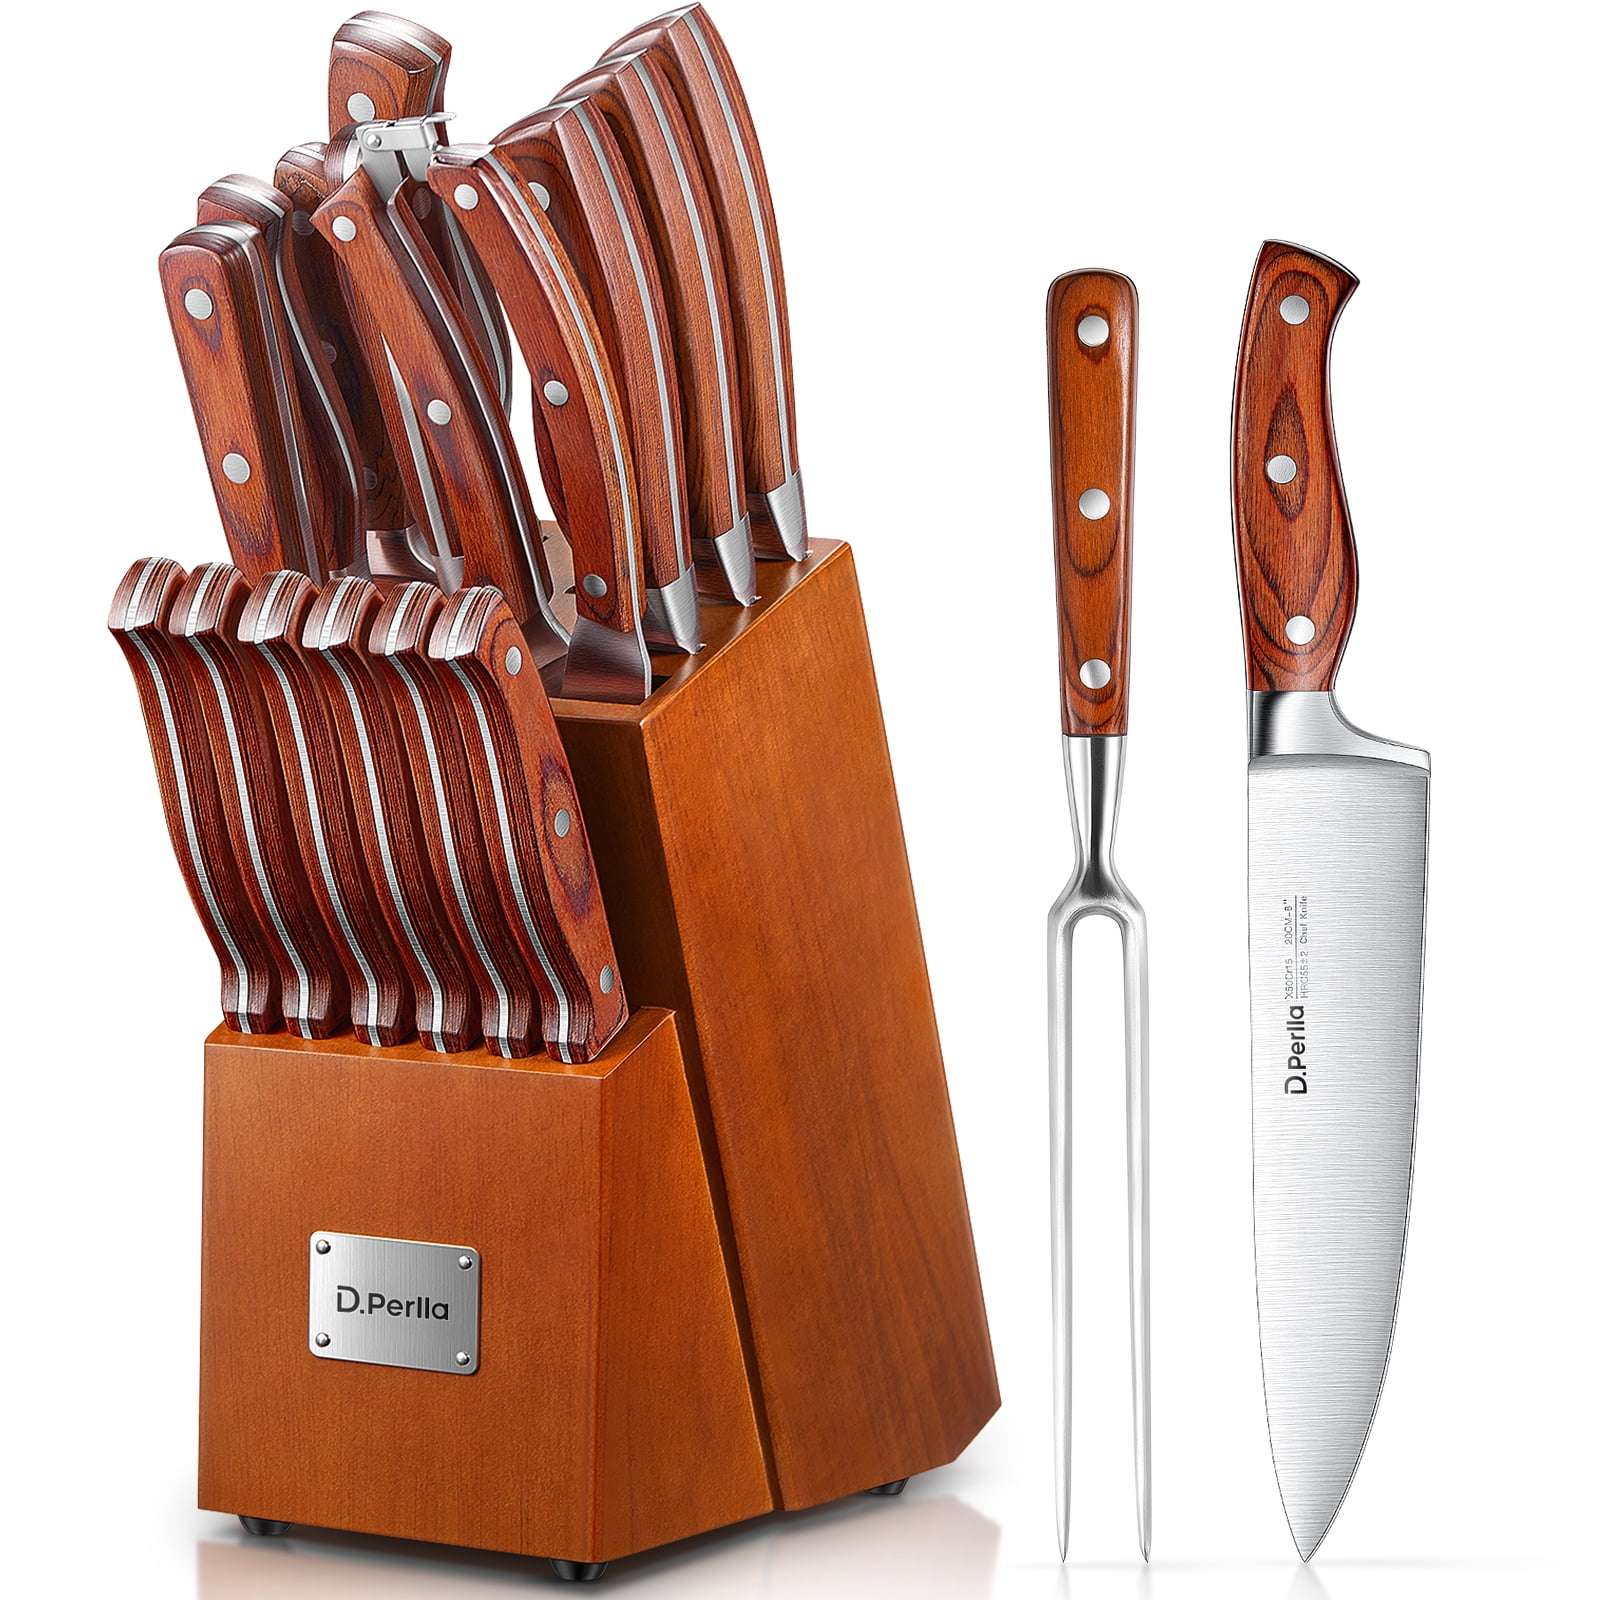 DEIK Knife Set High Carbon Stainless Steel Kitchen Knife Set 16 PCS, BO  Oxidation for Anti-rusting and Sharp, Super Sharp Cutlery Knife Set with  Acrylic Stand and Serrated Steak Knives